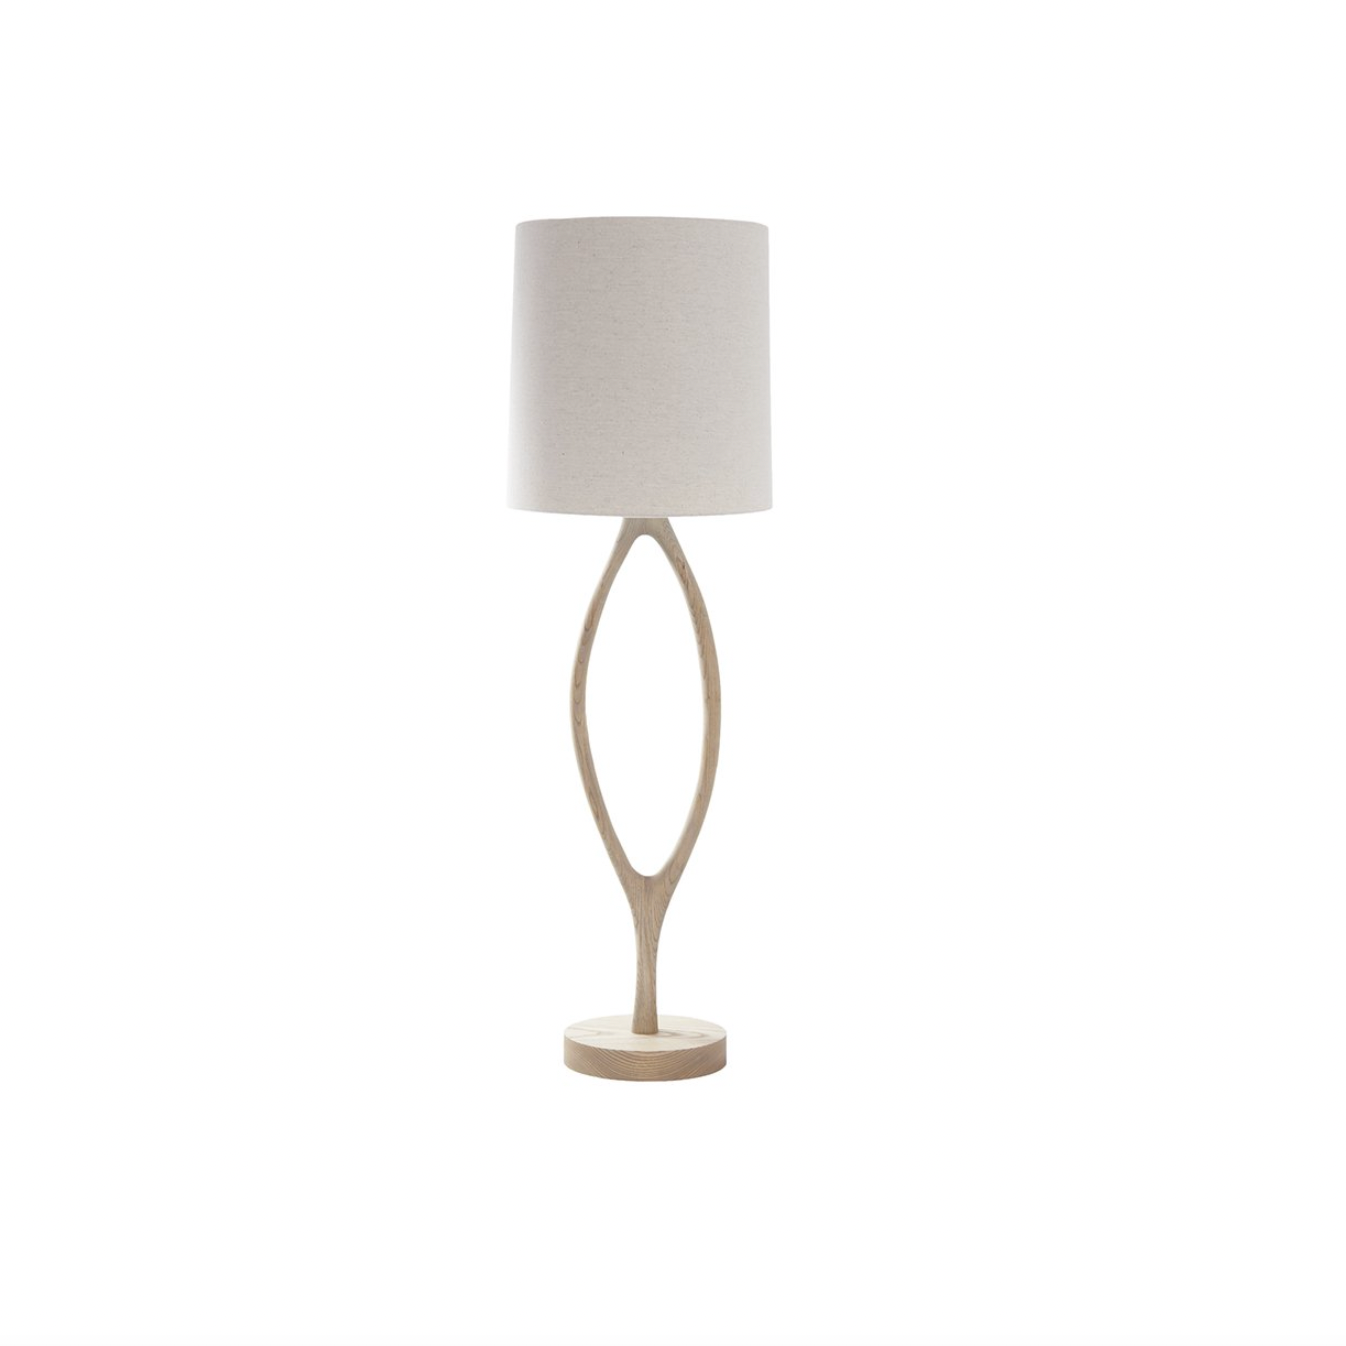 The Urbino Ash Floor Lamp is crafted from sustainably harvested hardwood by Verellen in North Carolina. The unique shape of the body paired with the oatmeal shade complements any room   Base: 16"w x 8"d x 62"h Overall Height: 76"h